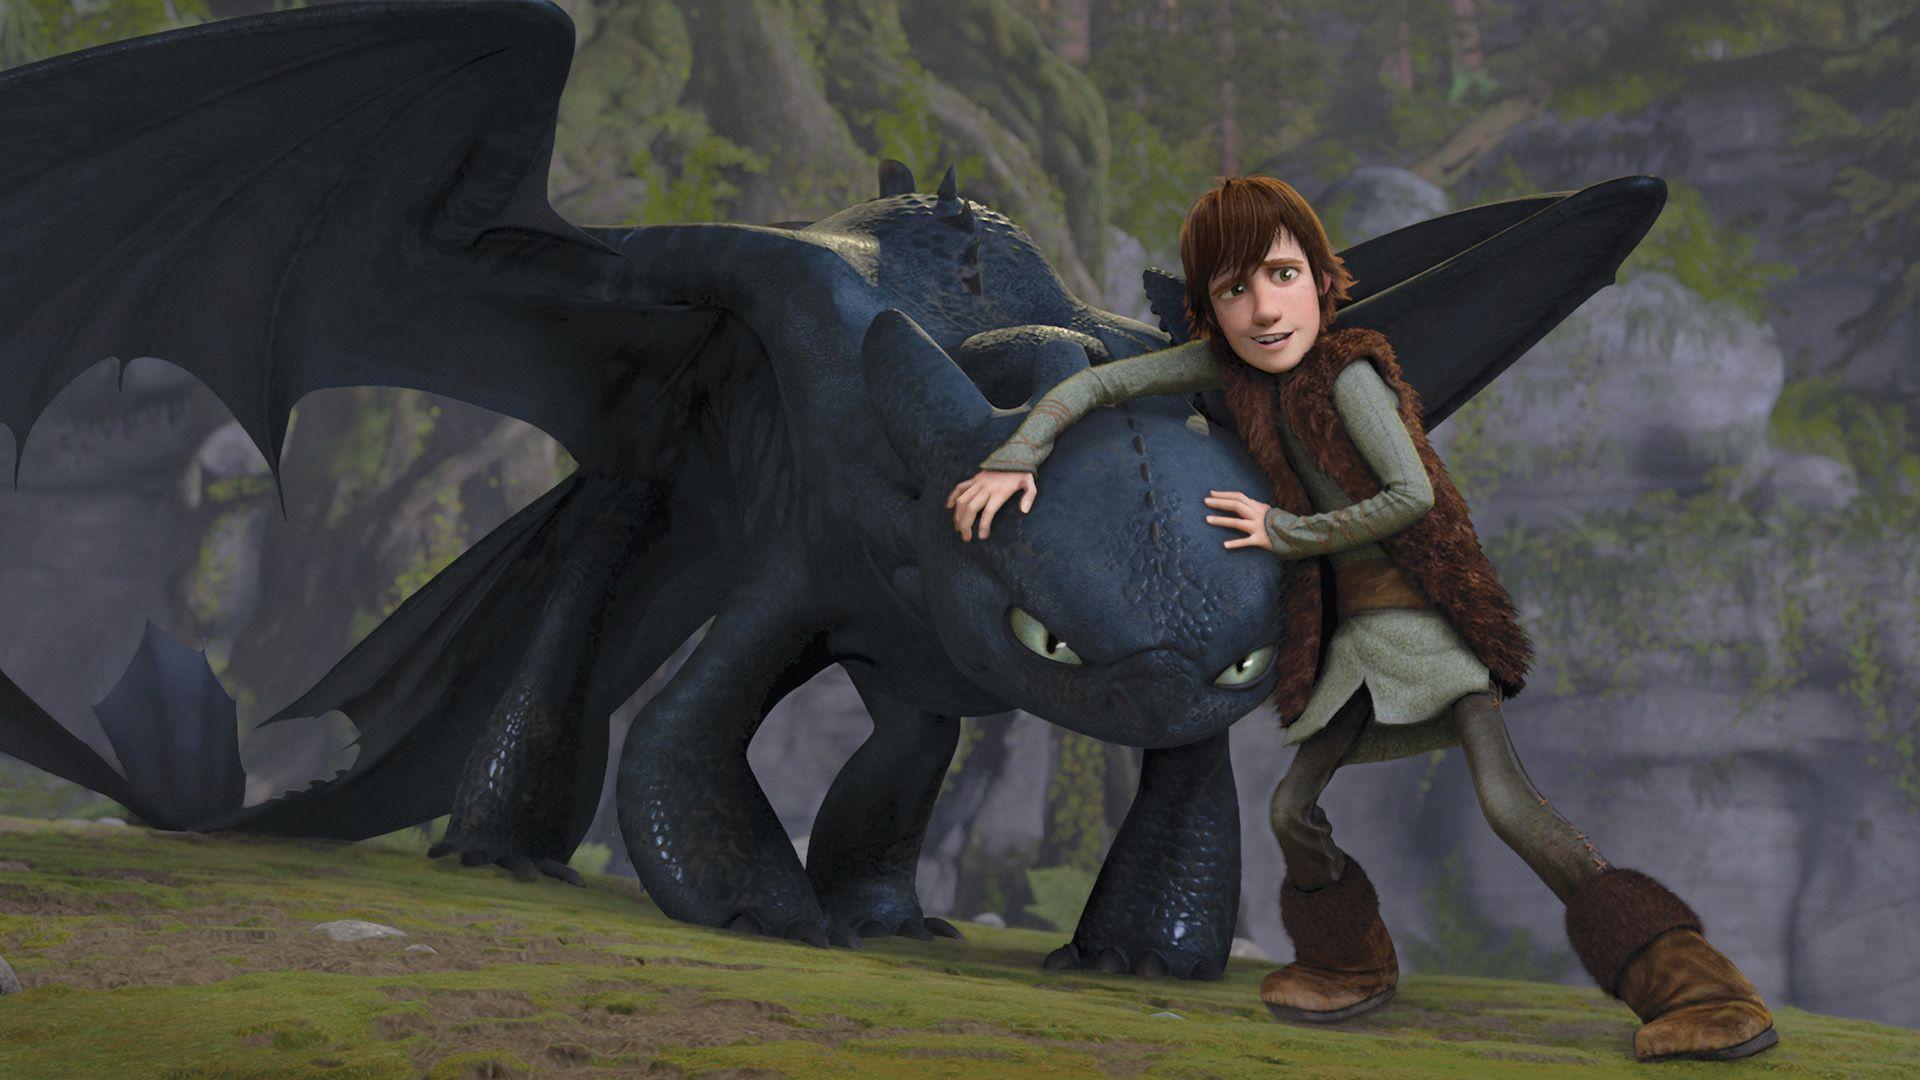 Download Movies Toothless Wallpaper 1920x1080